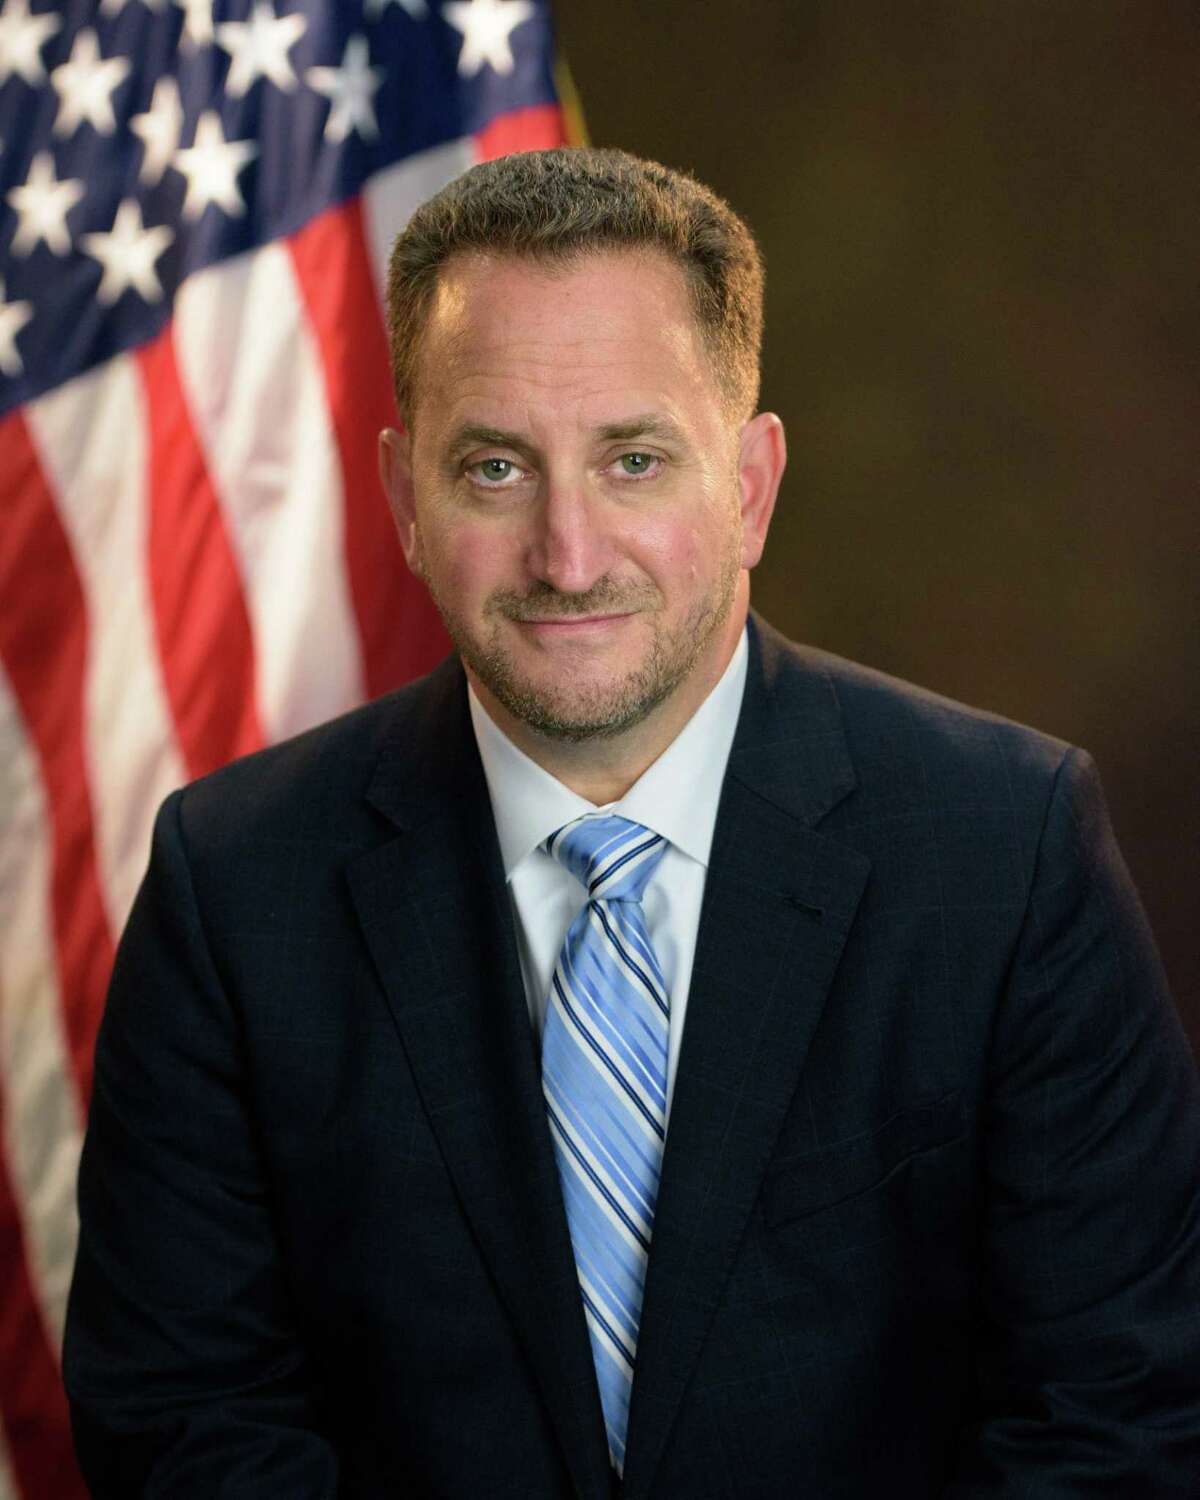 Gregg N. Sofer was officially sworn in as the new U.S. Attorney for the Western District of Texas on Tuesday, Oct. 13, 2020.